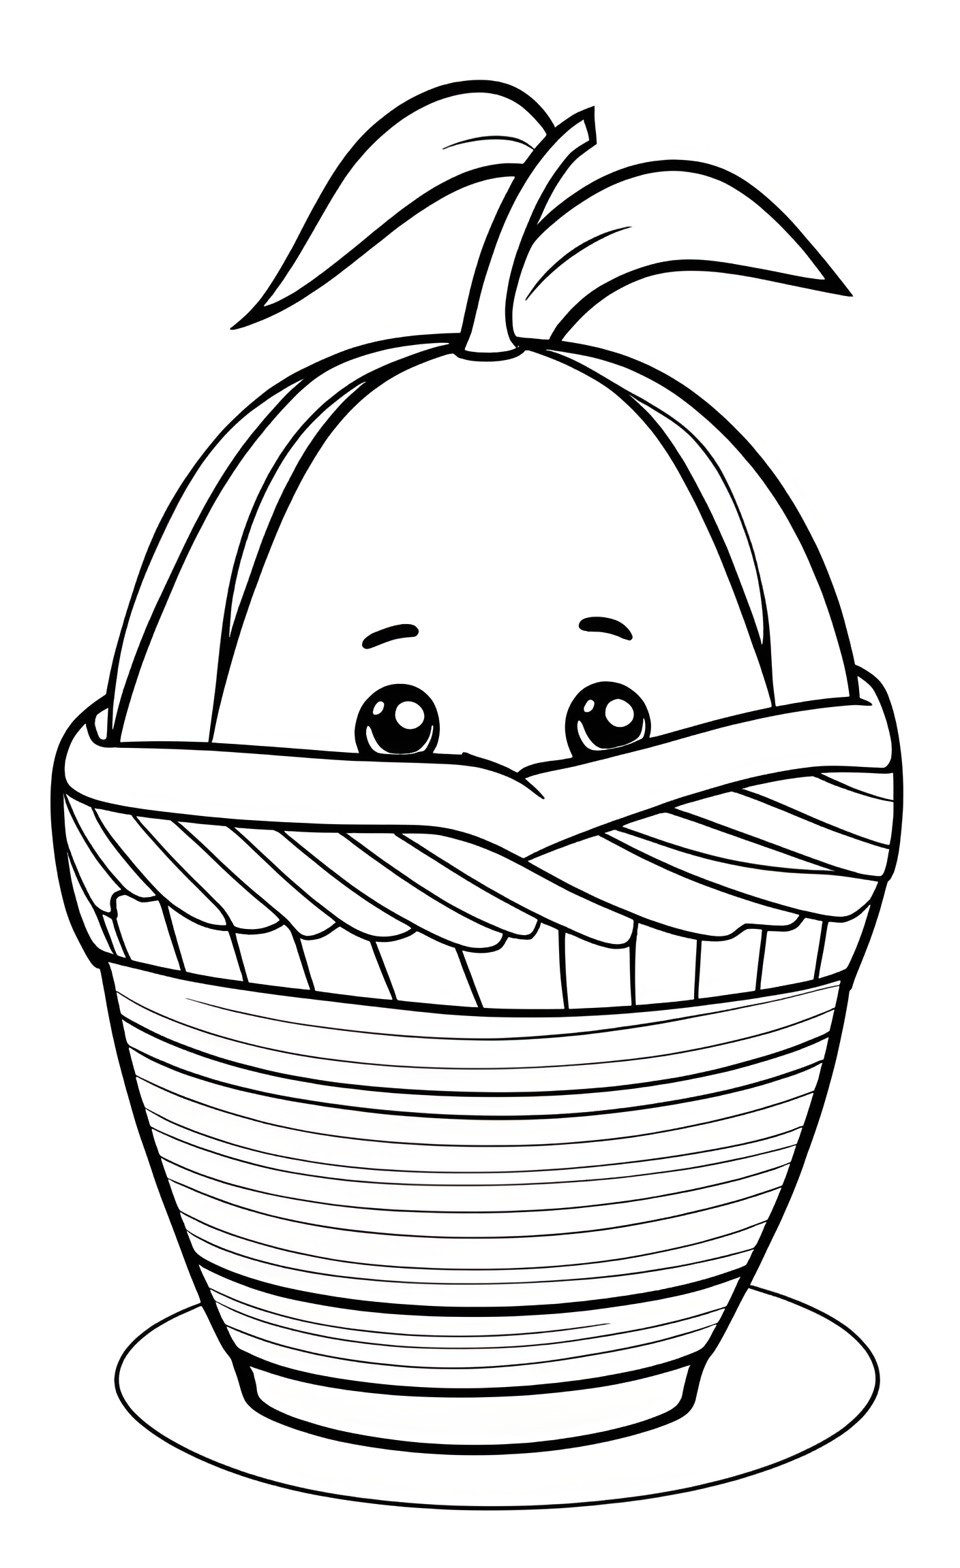 Simple Mango Basket coloring pages for kids